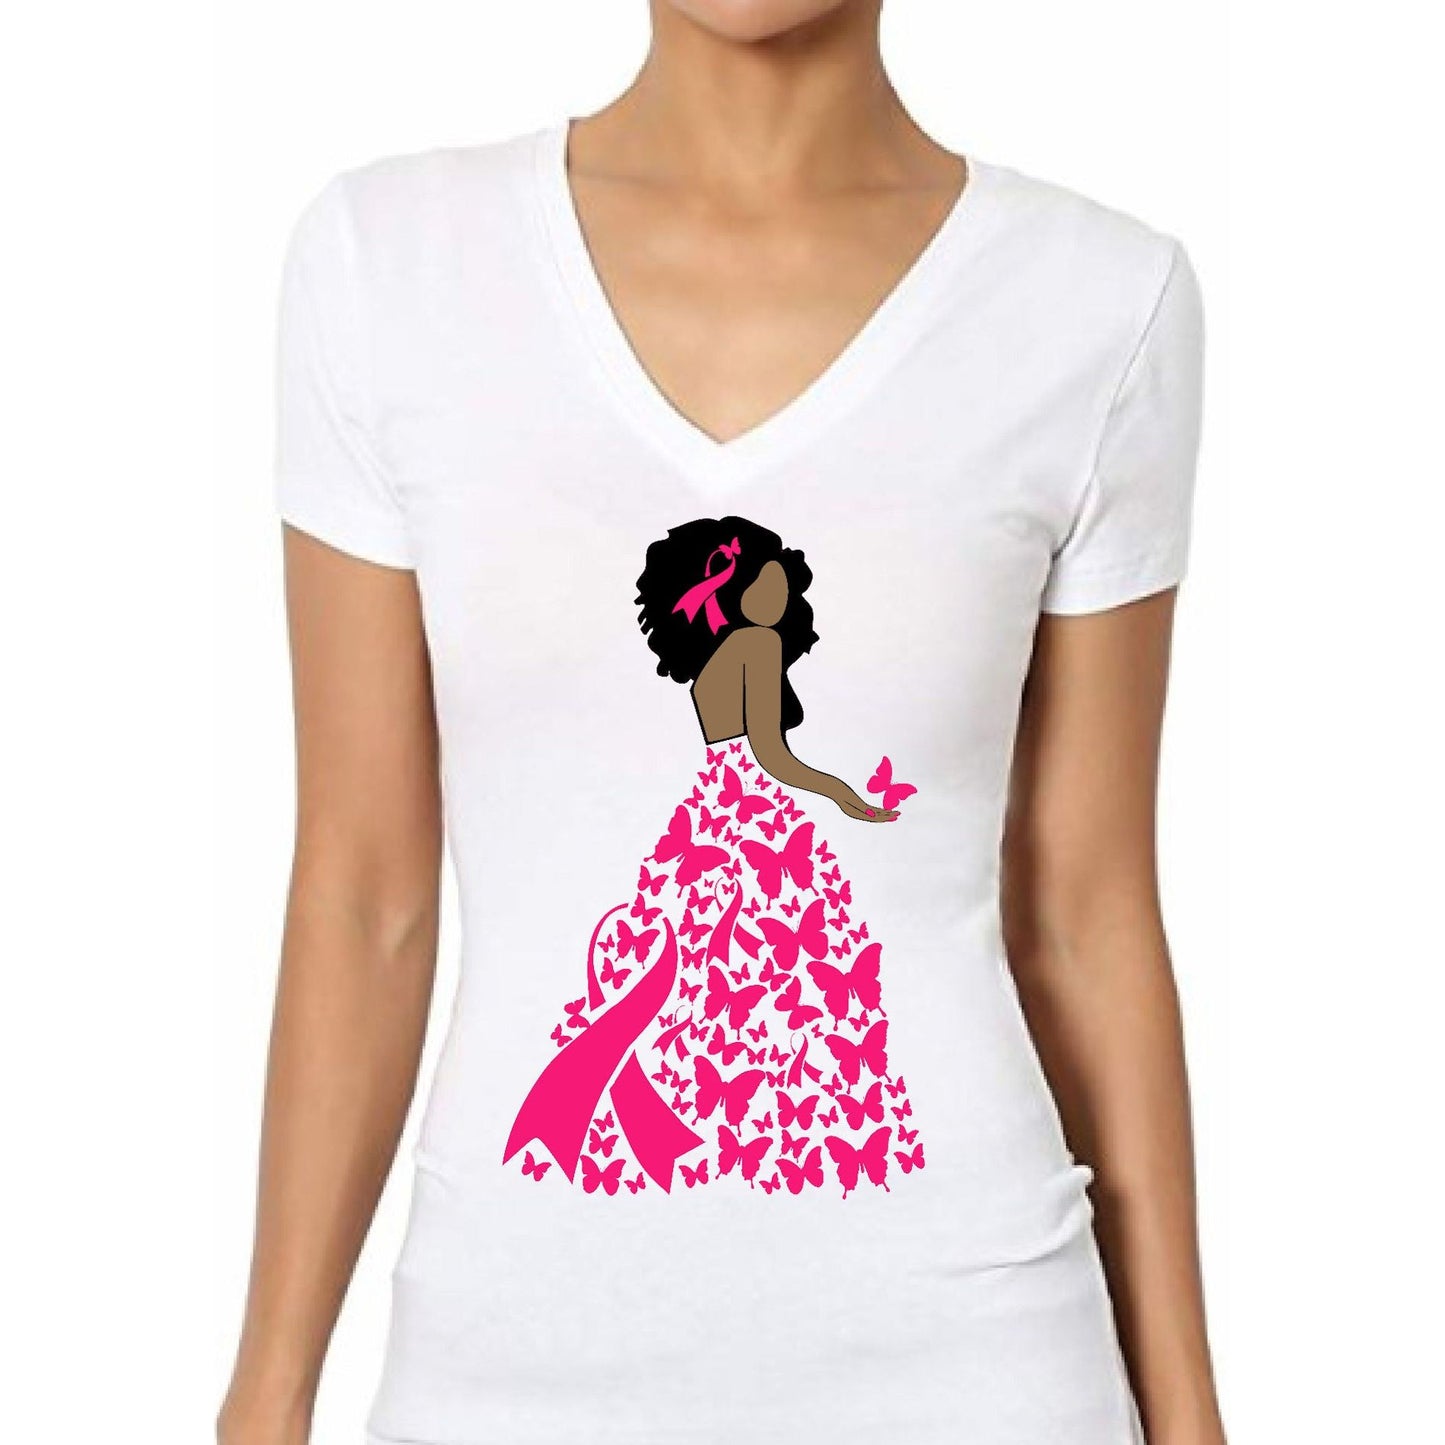 Butterfly Ribbon Breast Cancer Awareness T-Shirt